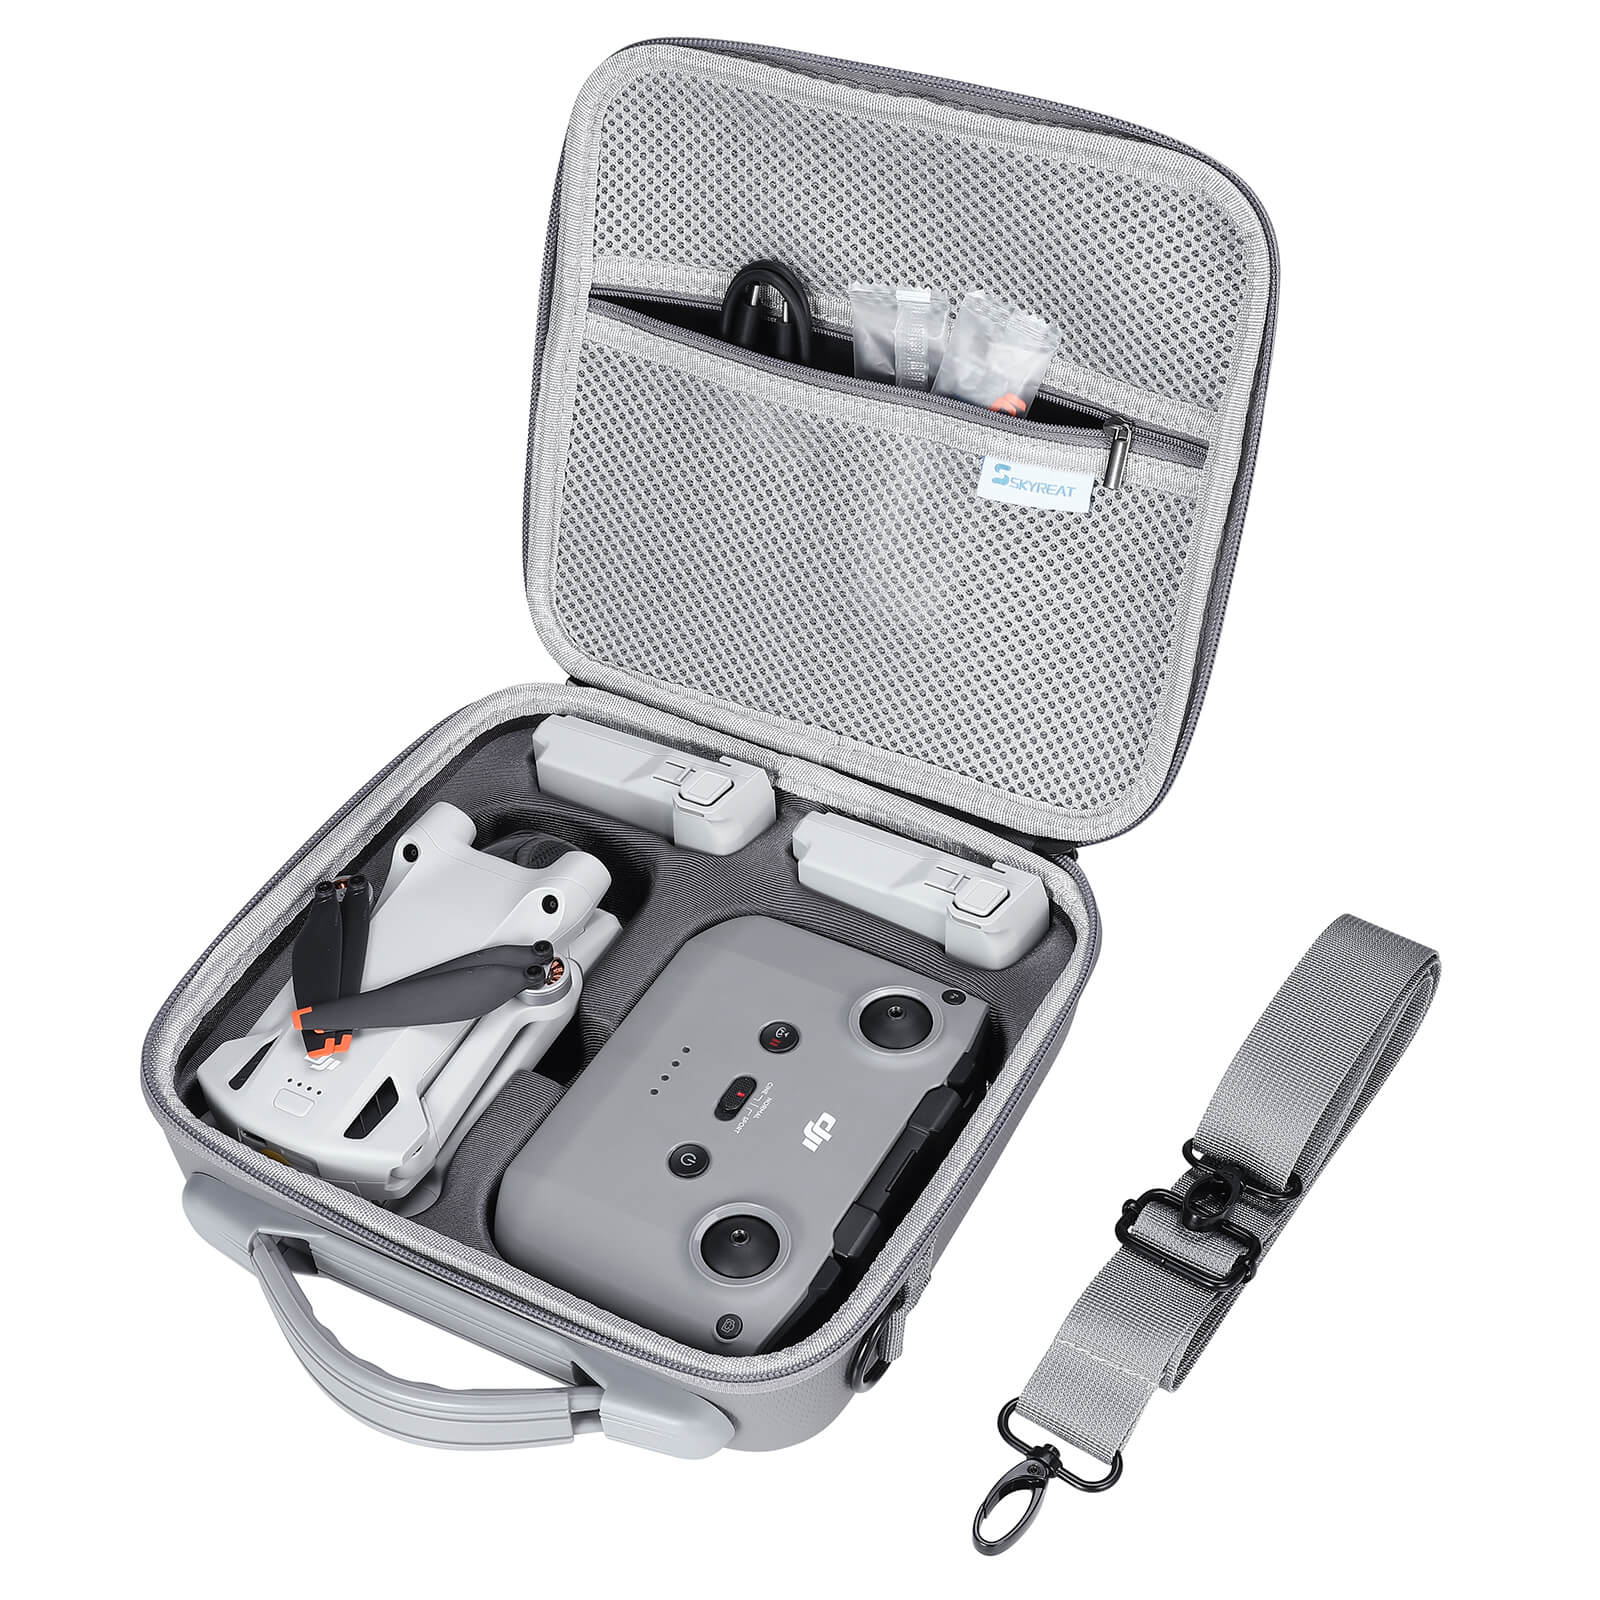 SKYREAT Carry Case for DJI Mini 3 Pro with RC-N1 Remote Controller - Skyreat